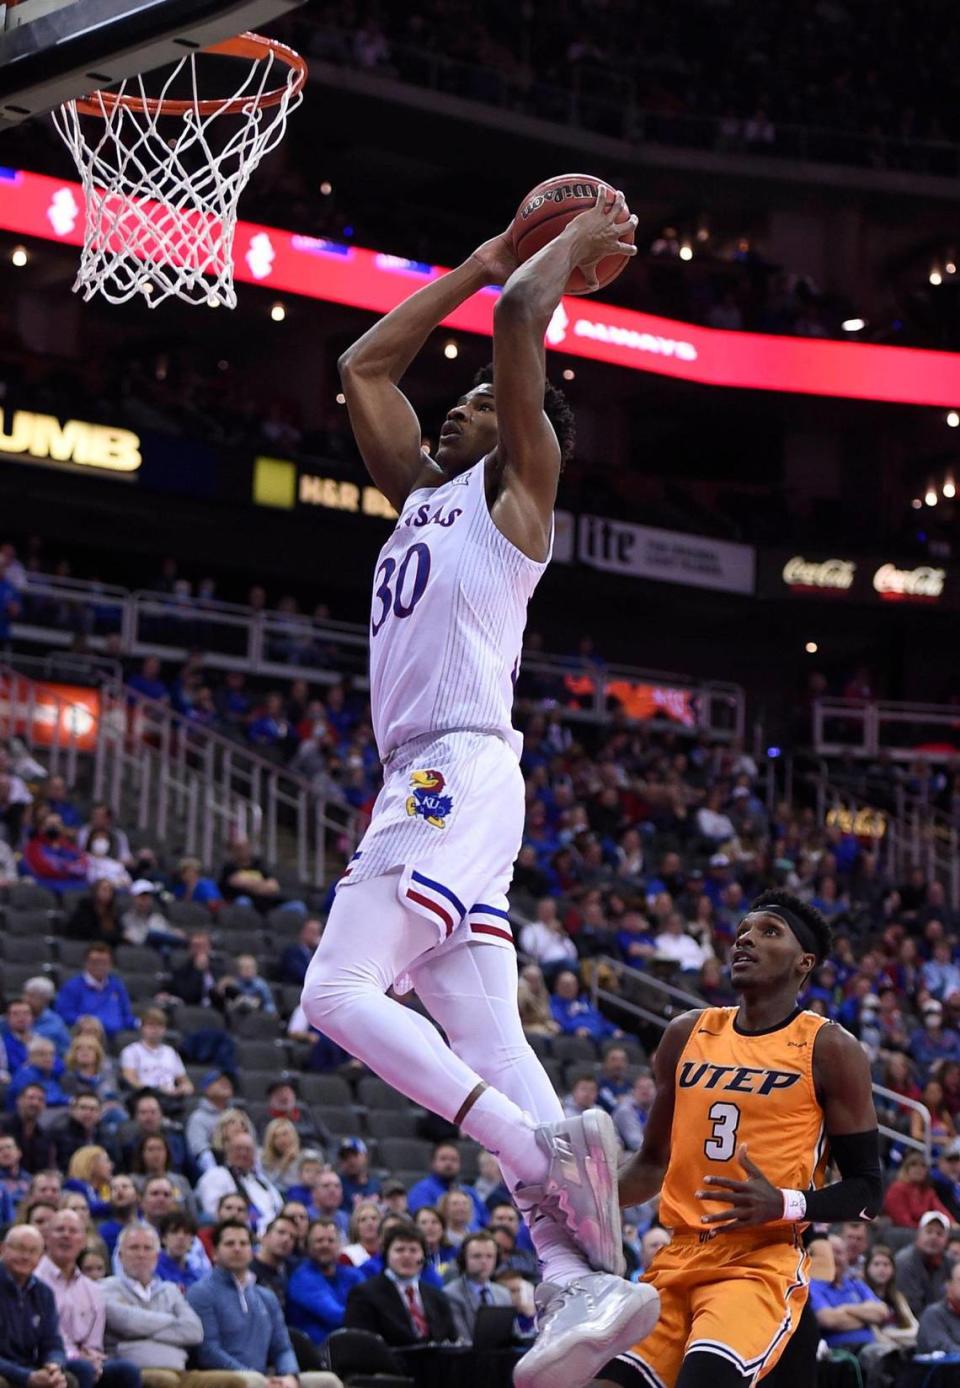 Kansas’ Ochai Agbaji flies by UTEP’s Keonte Kennedy for a dunk during the first half of the Jayhawks’ victory on Tuesday night at the T-Mobile Center in Kansas City.